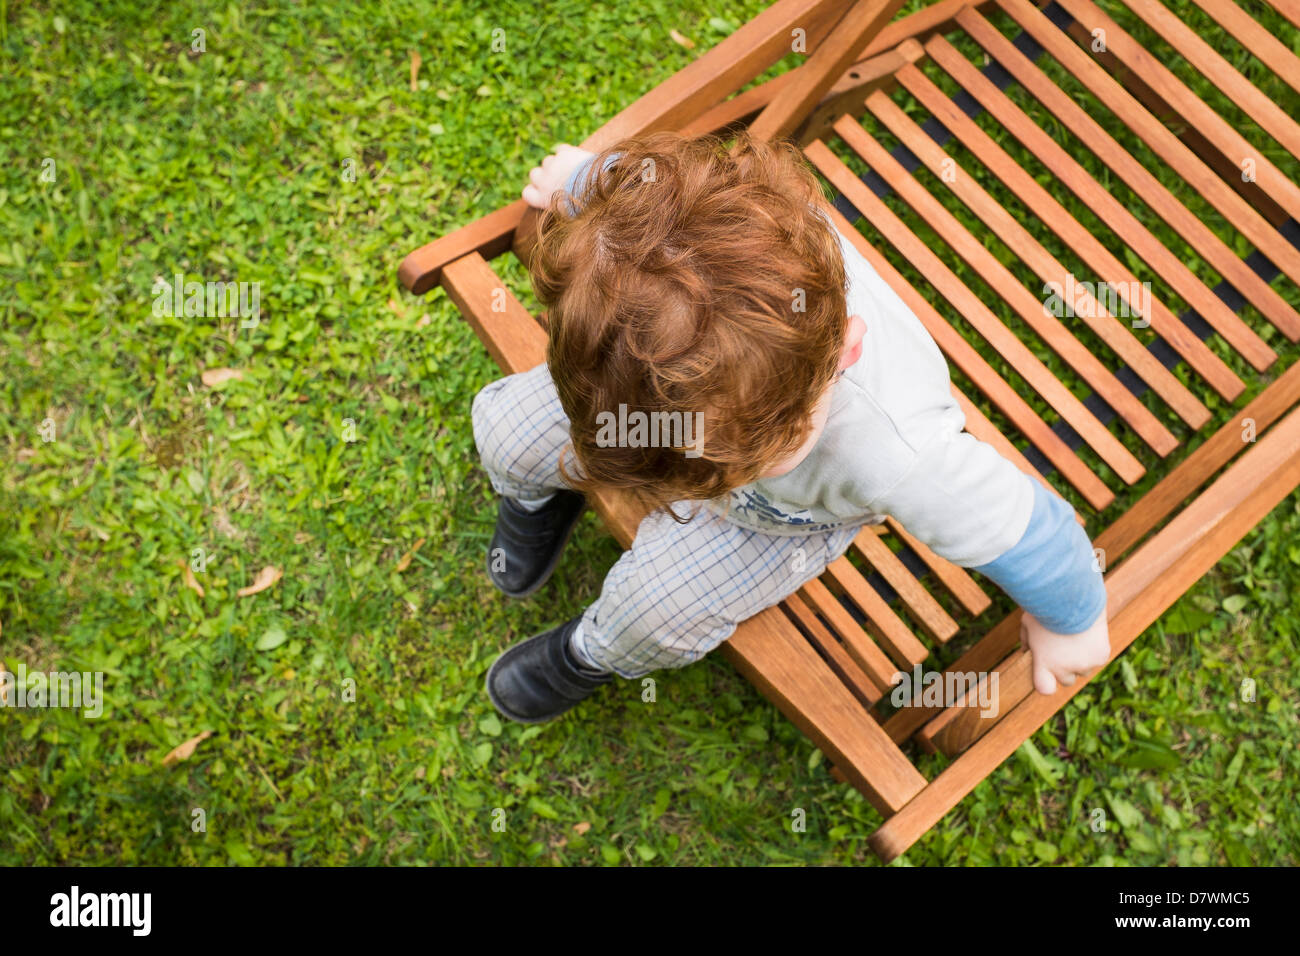 View of a 2-year old red haired boy sitting on deckchair. Taken from above Stock Photo